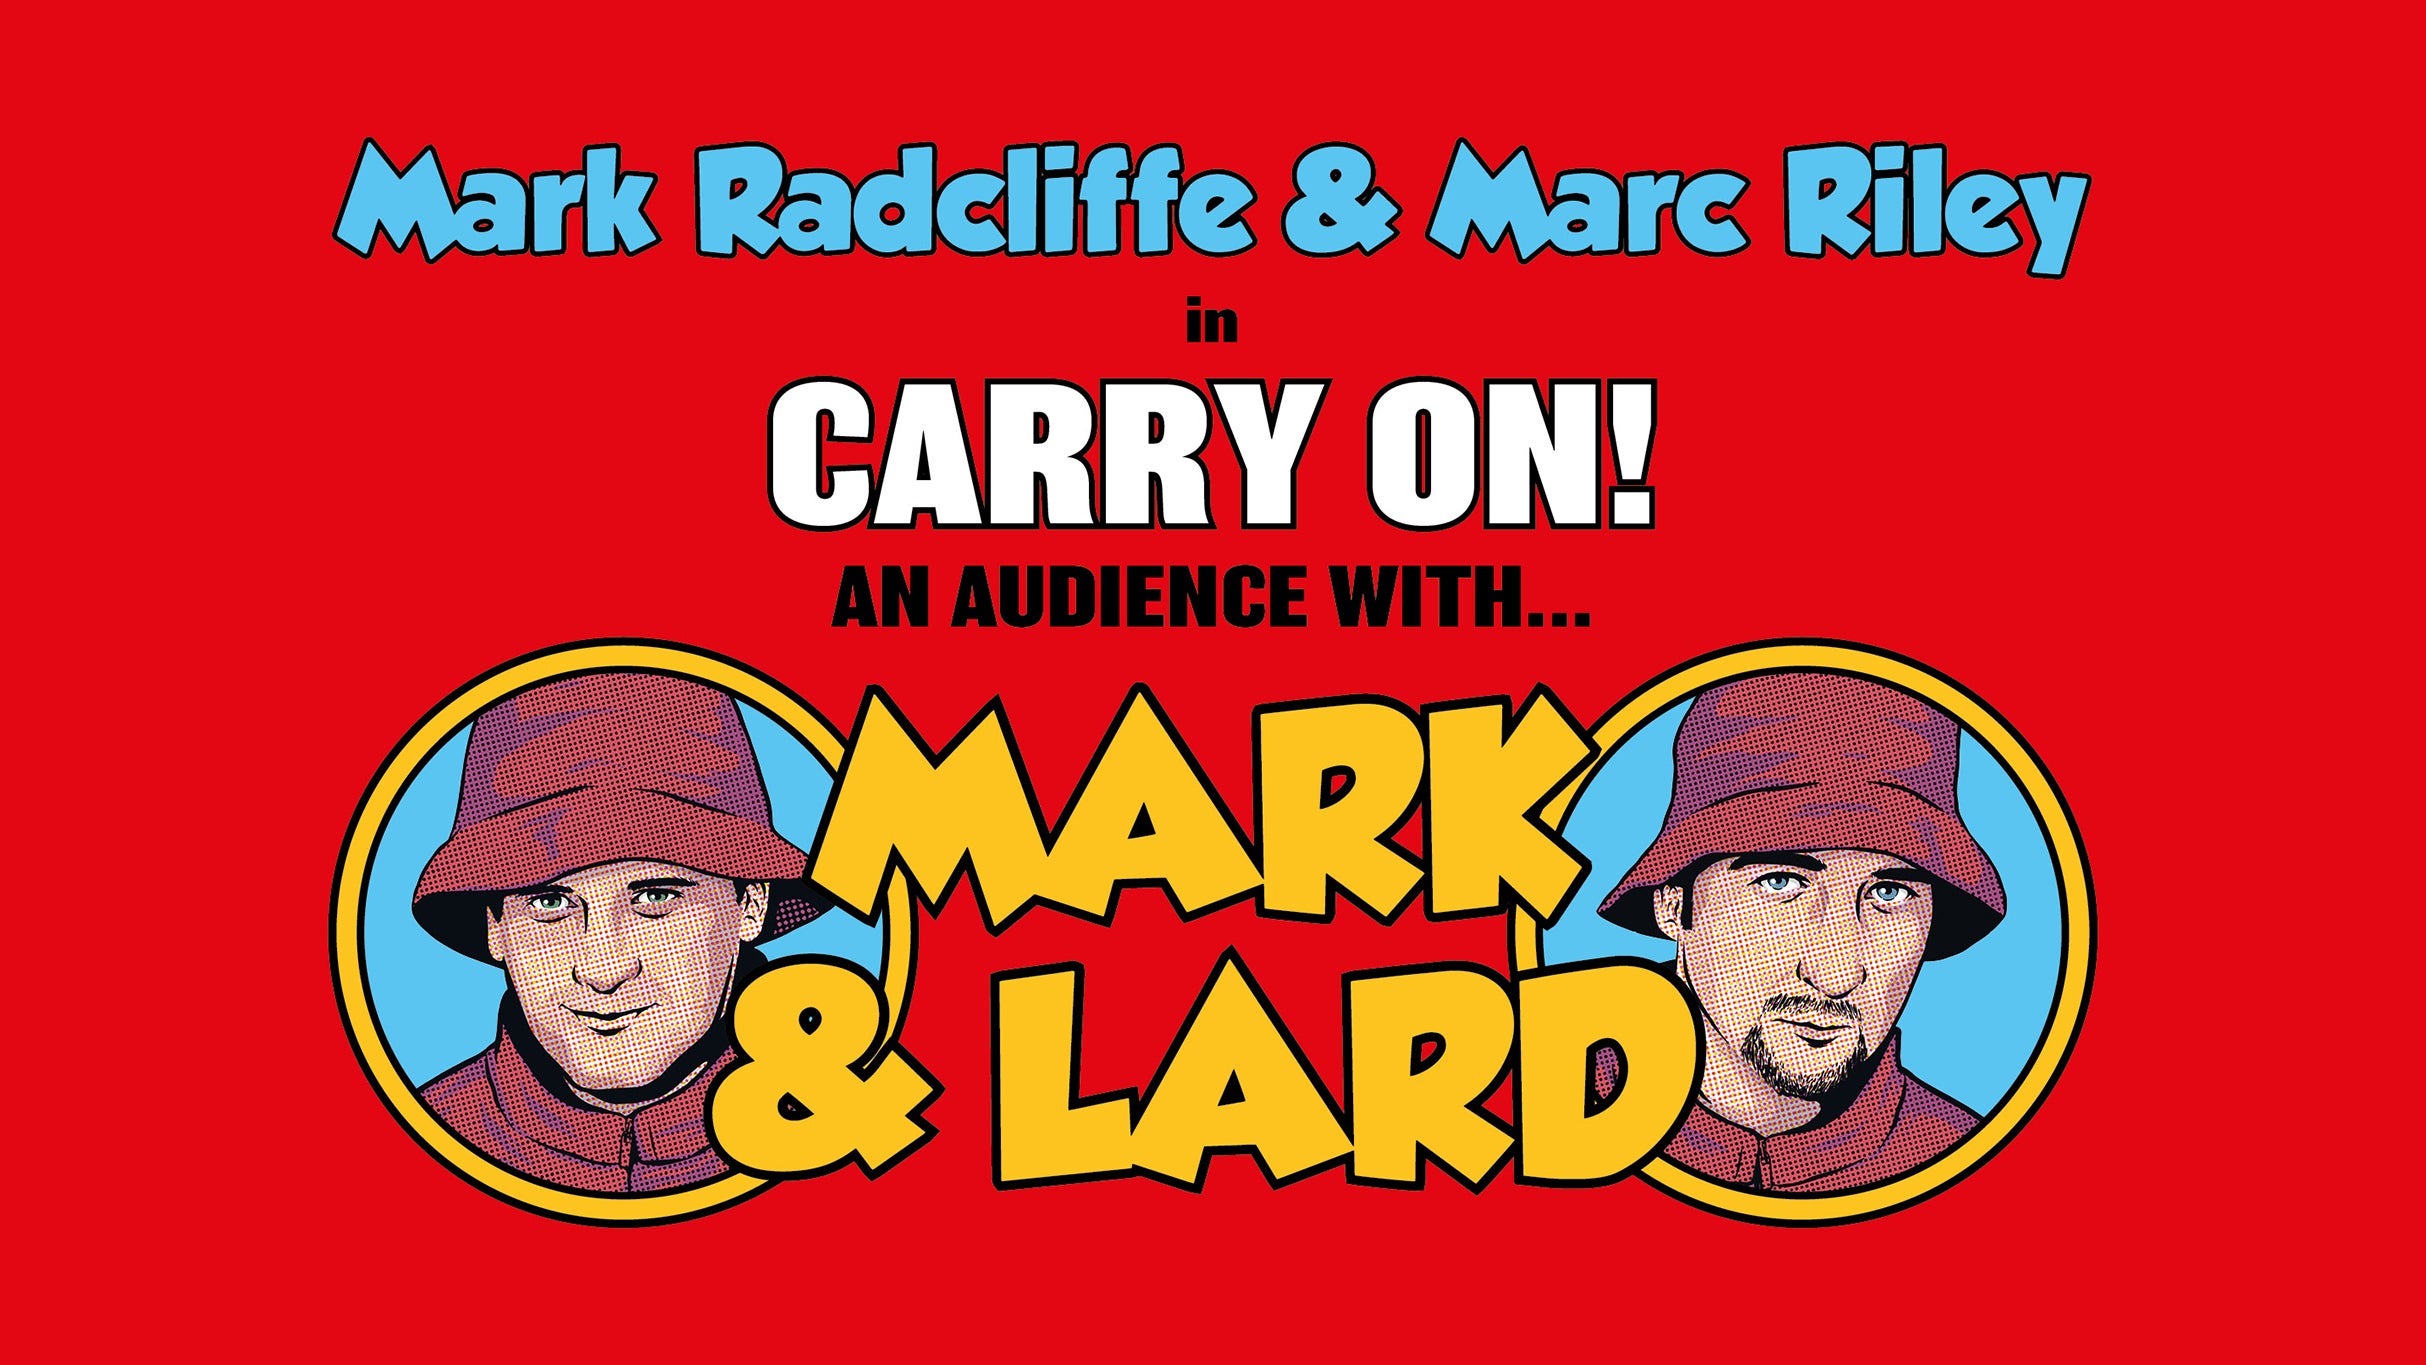 An Audience with Mark and Lard in York promo photo for Ticketmaster presale offer code